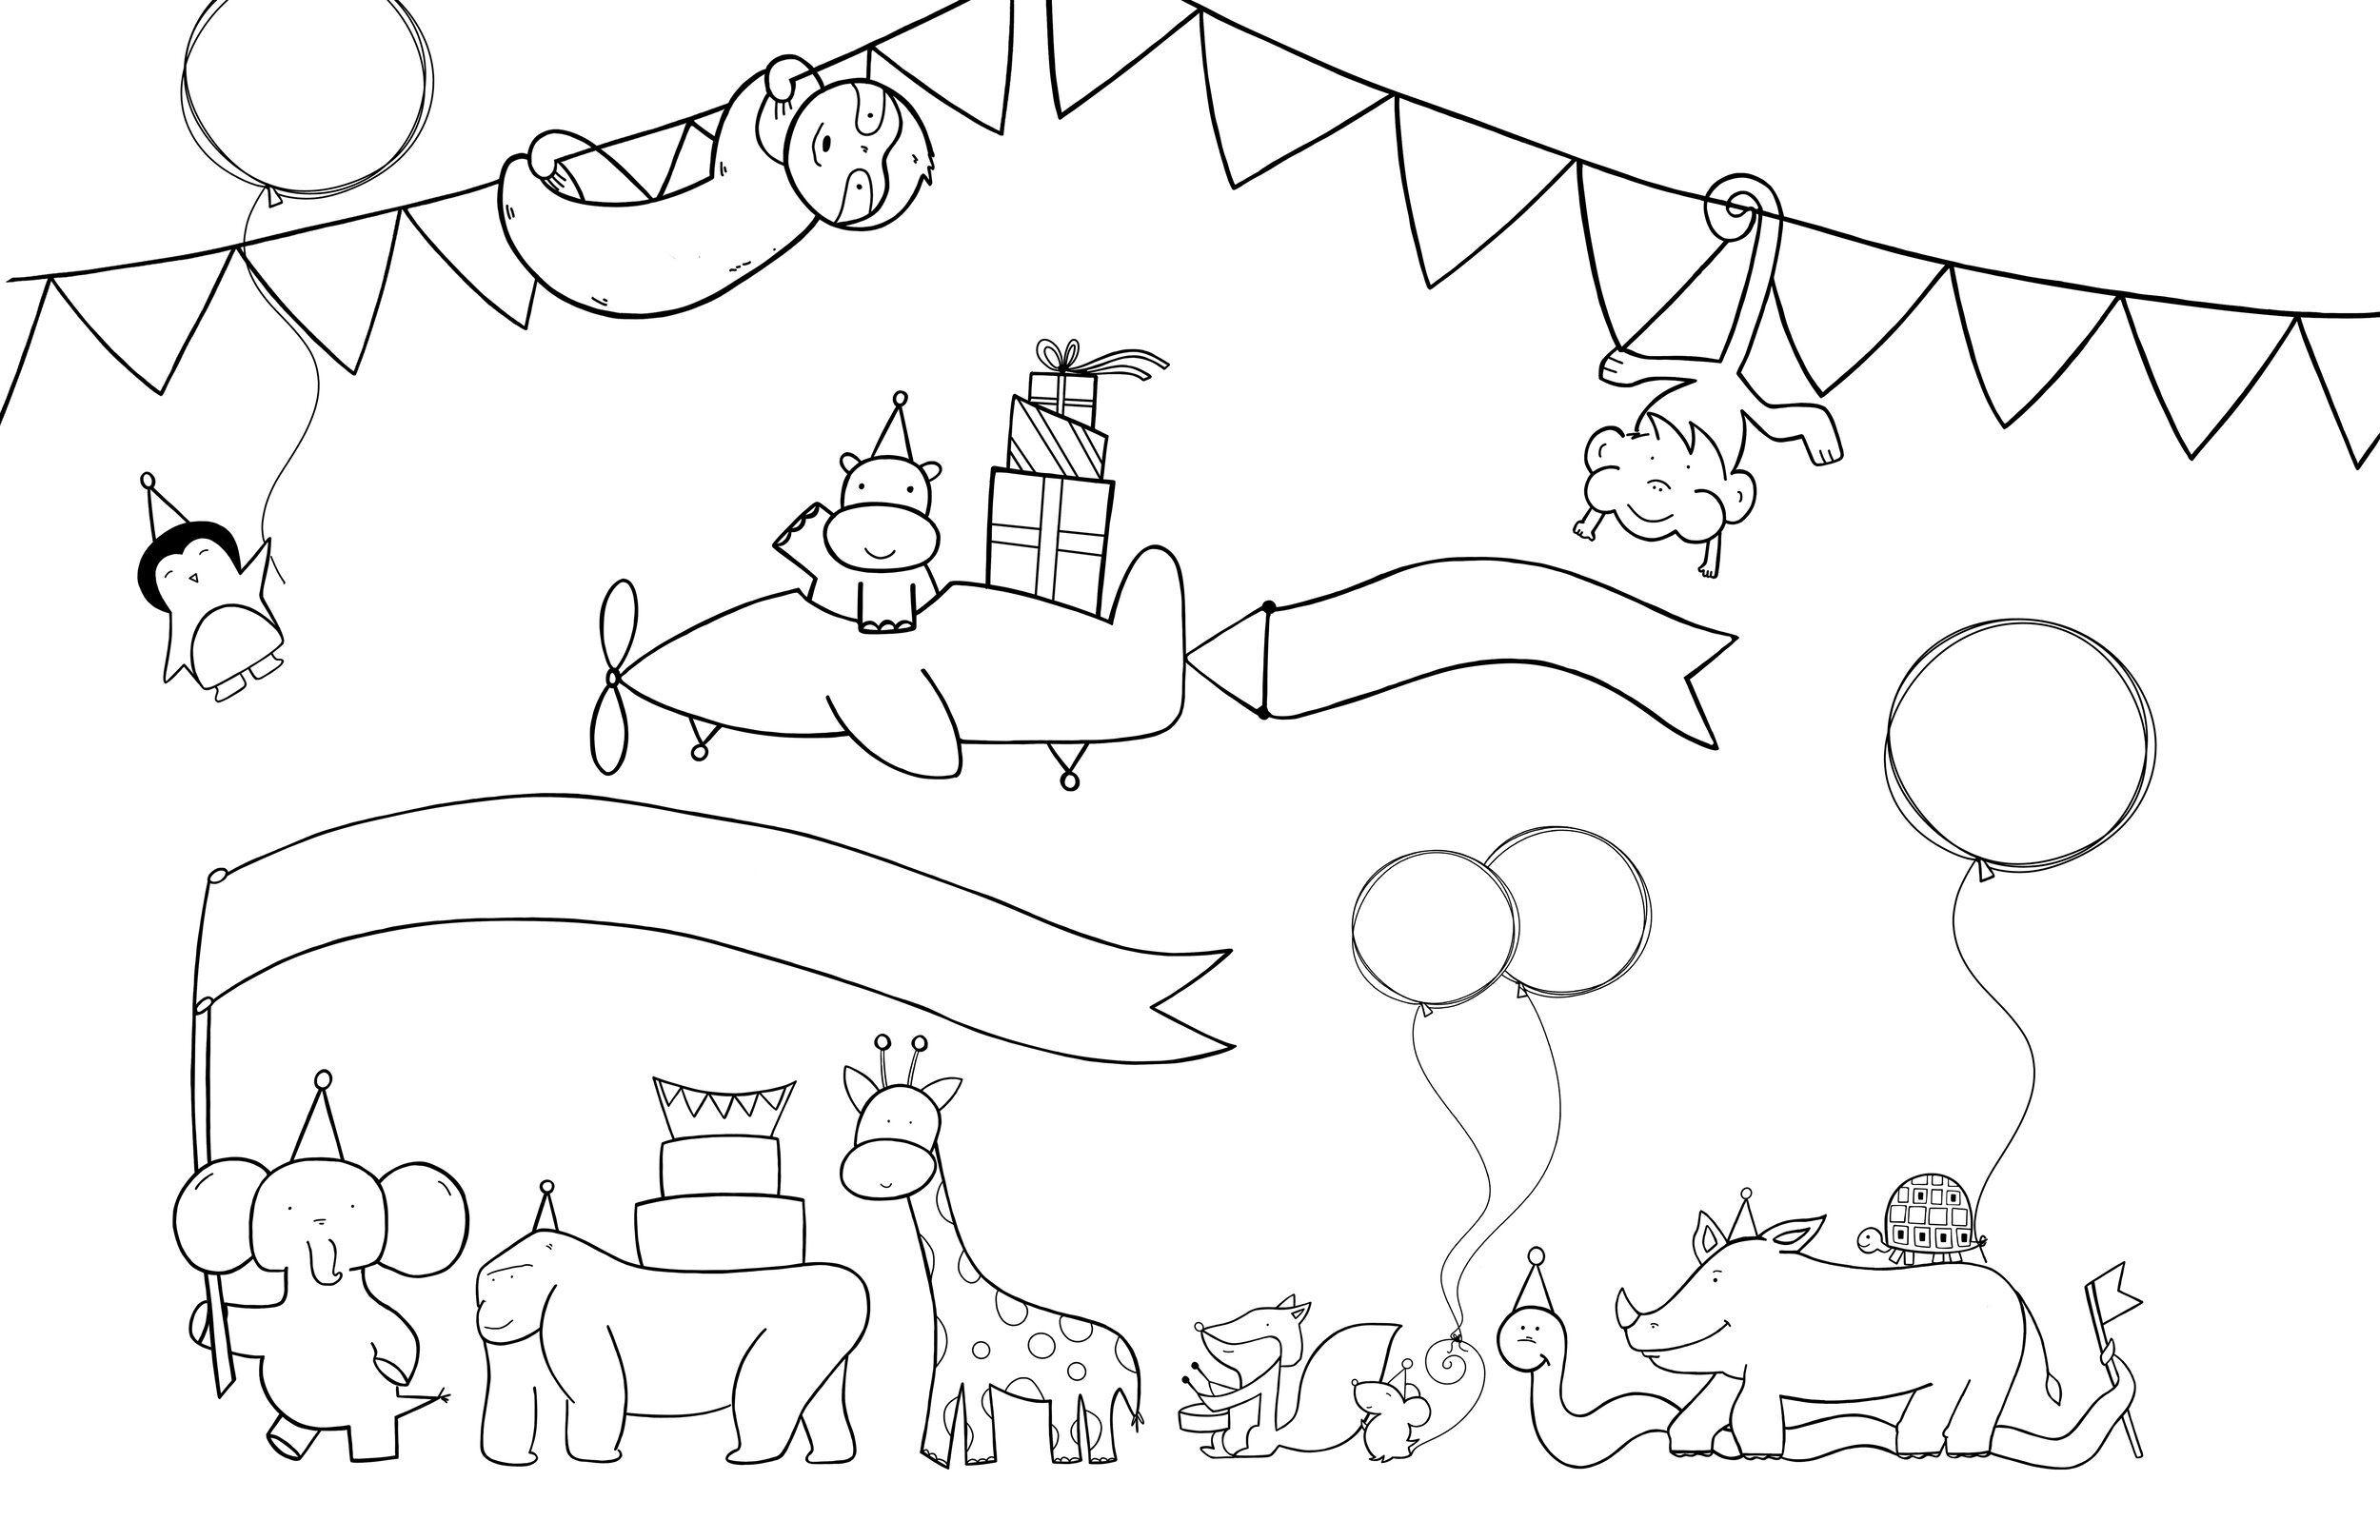 Party Animal Coloring Page — The Doodle Shop   Kayla Kitts Co